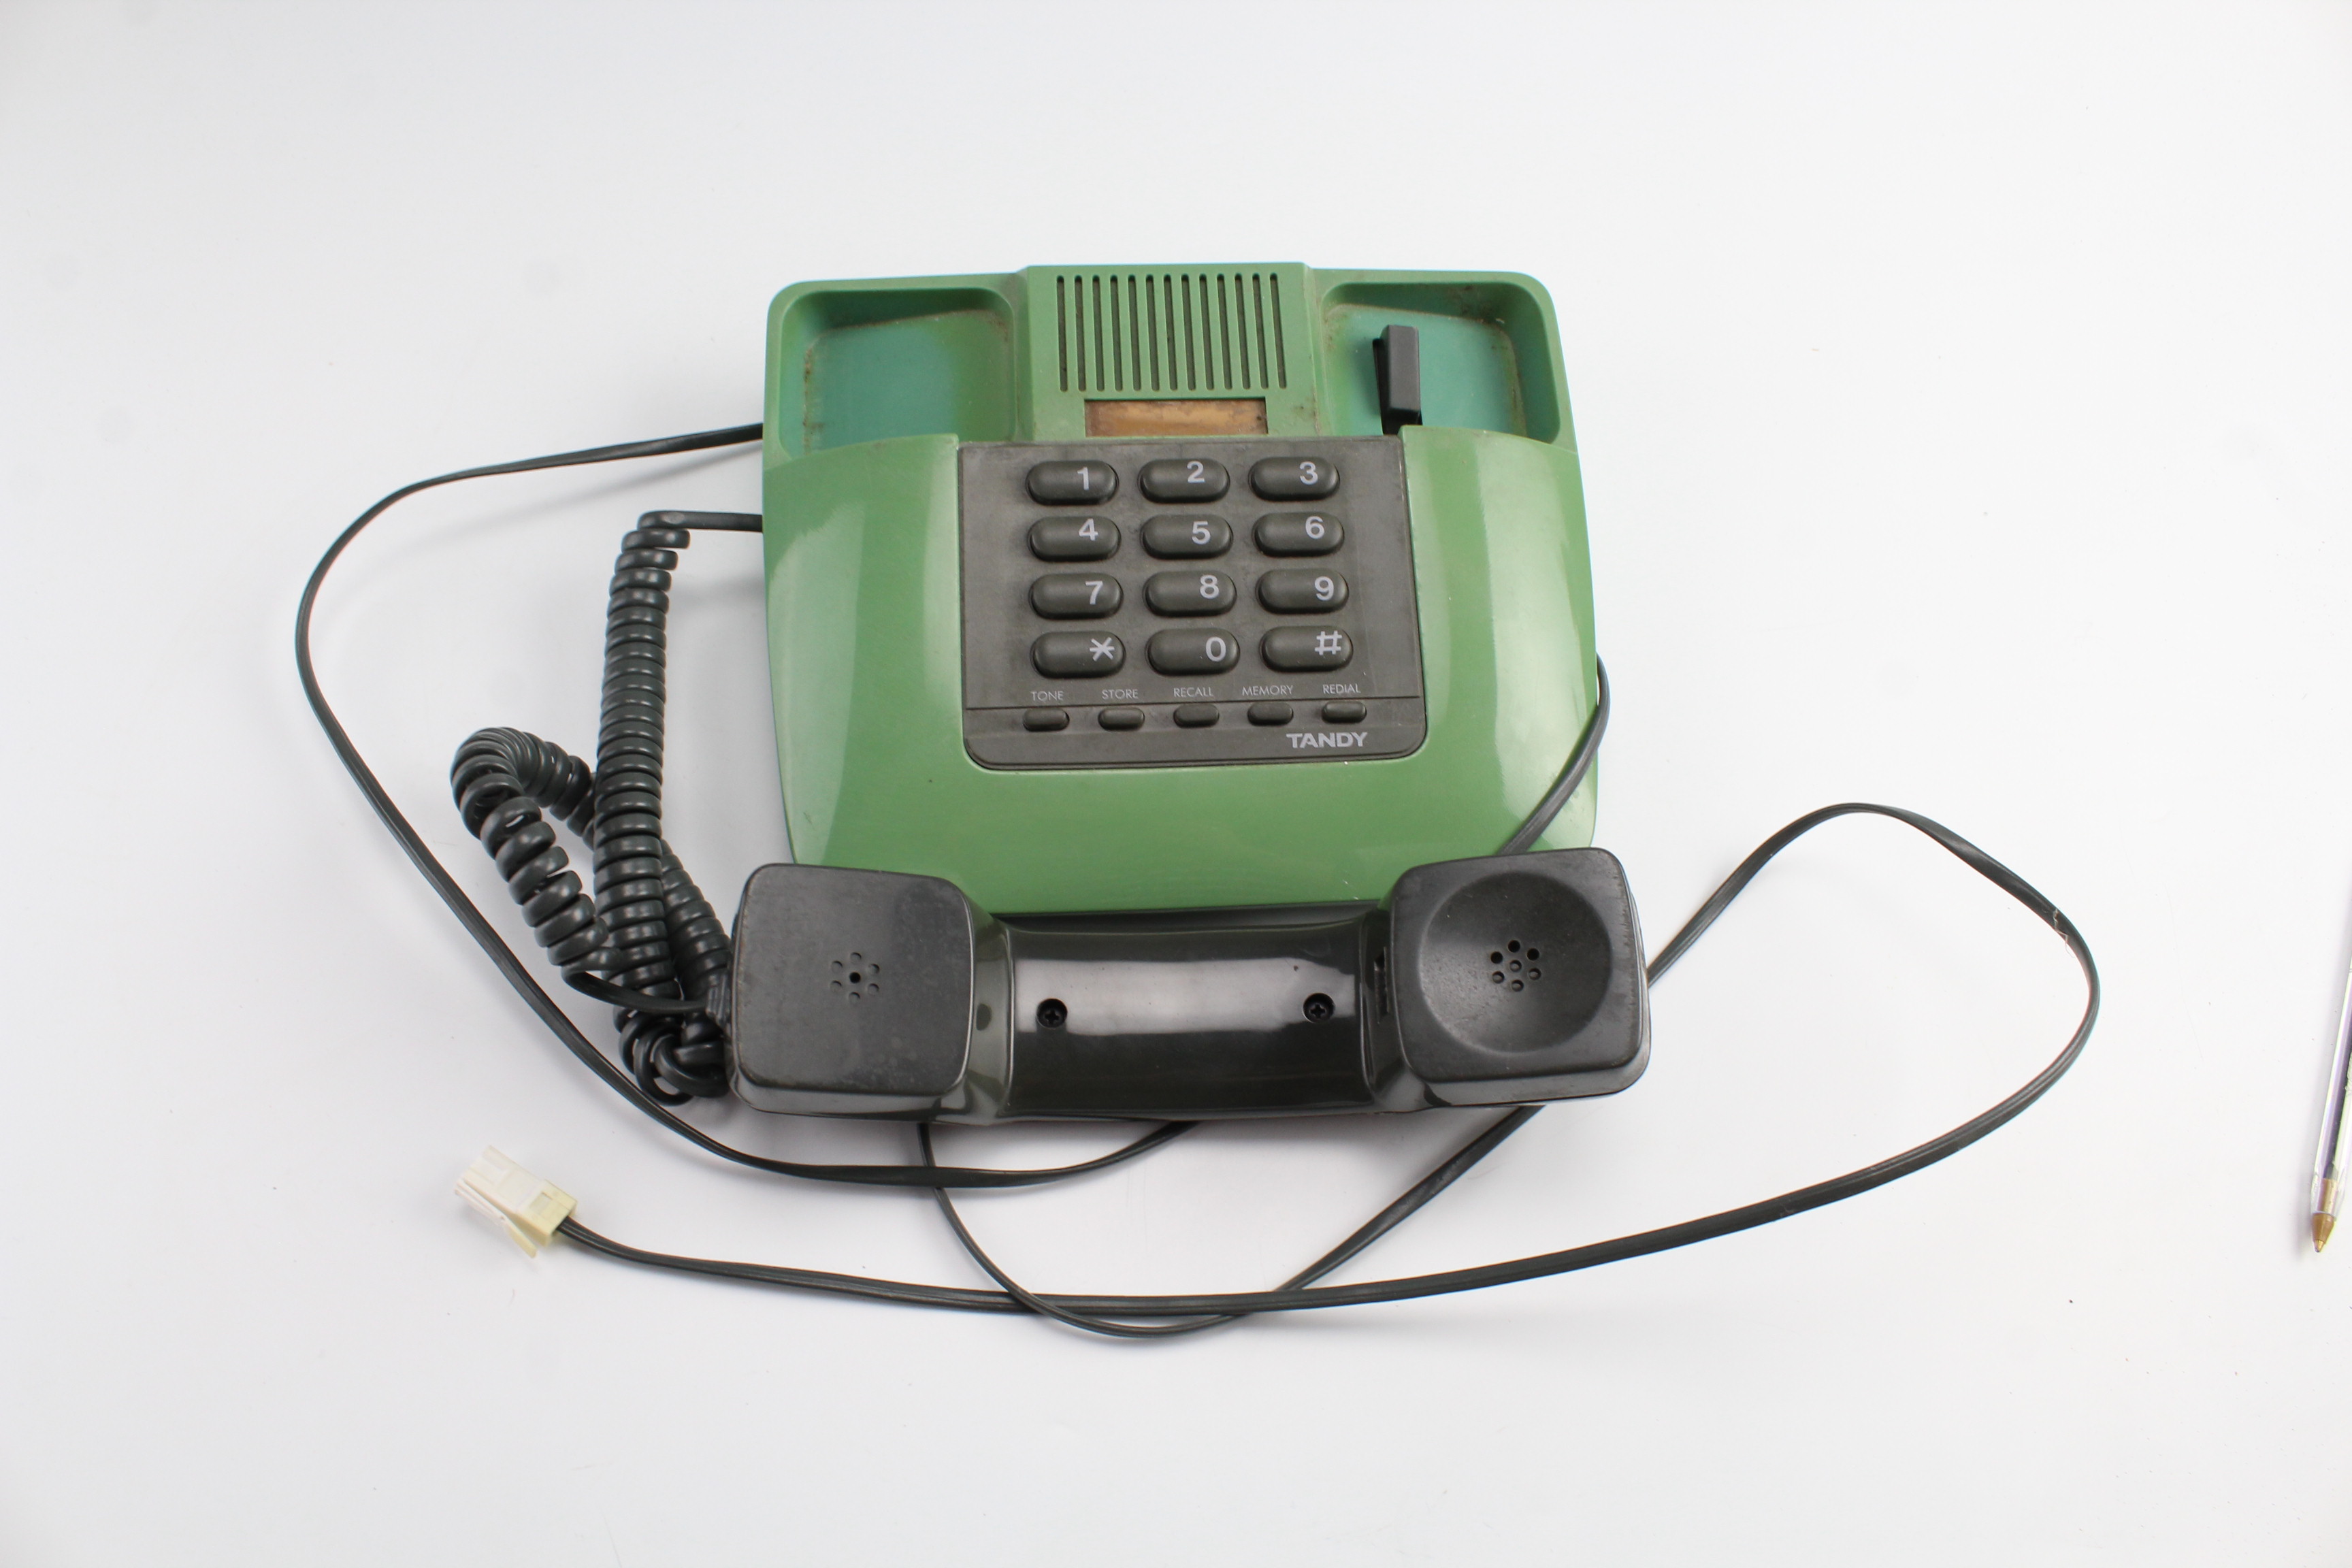 A 1980s Tandy telephone - Image 3 of 3